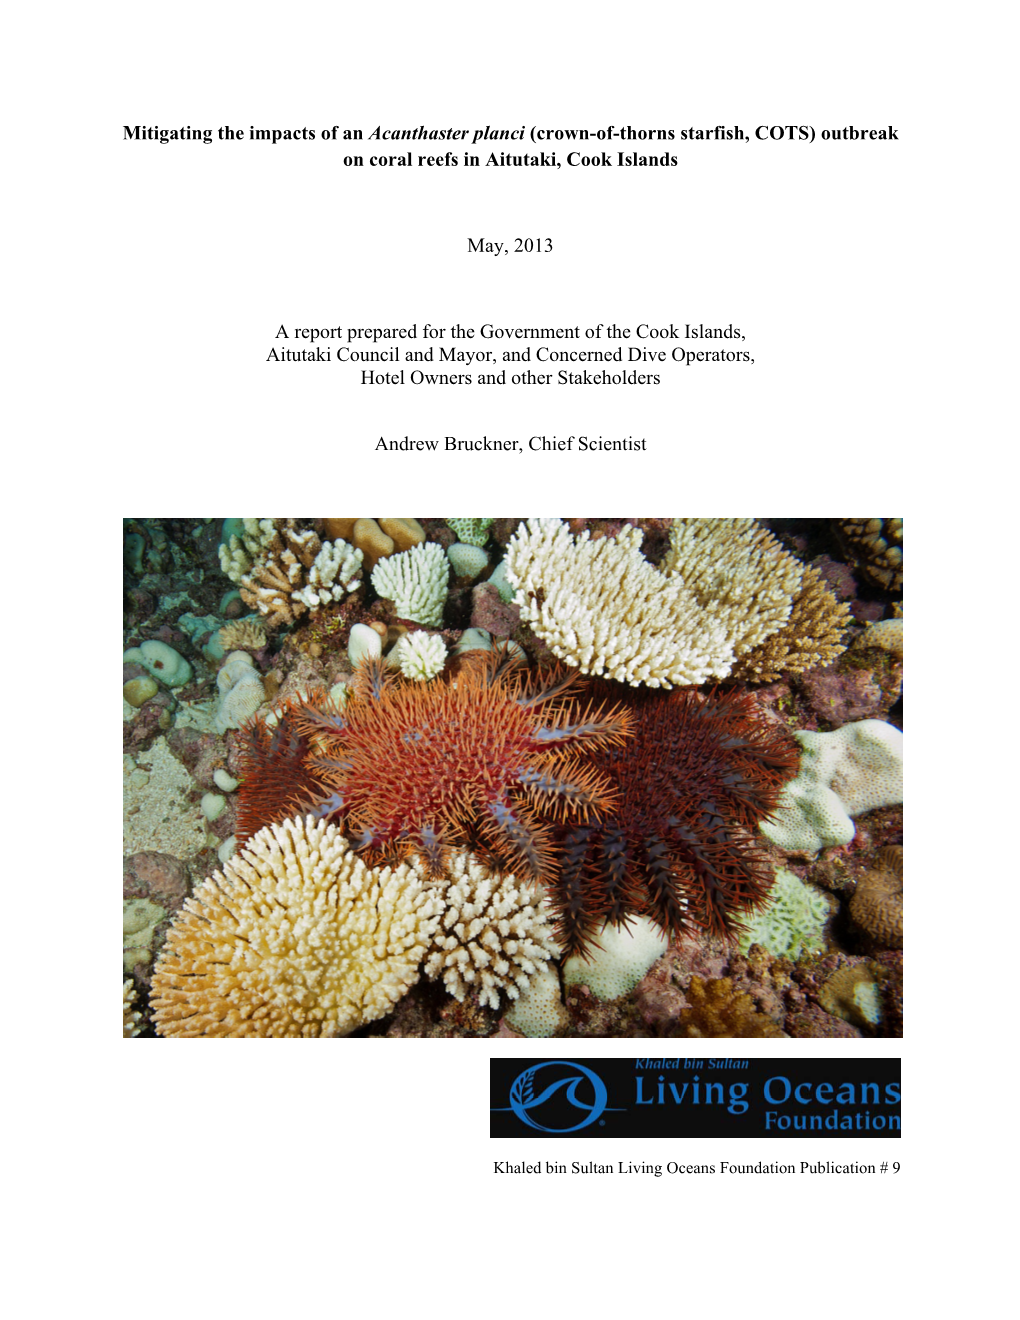 Crown-Of-Thorns Starfish, COTS) Outbreak on Coral Reefs in Aitutaki, Cook Islands